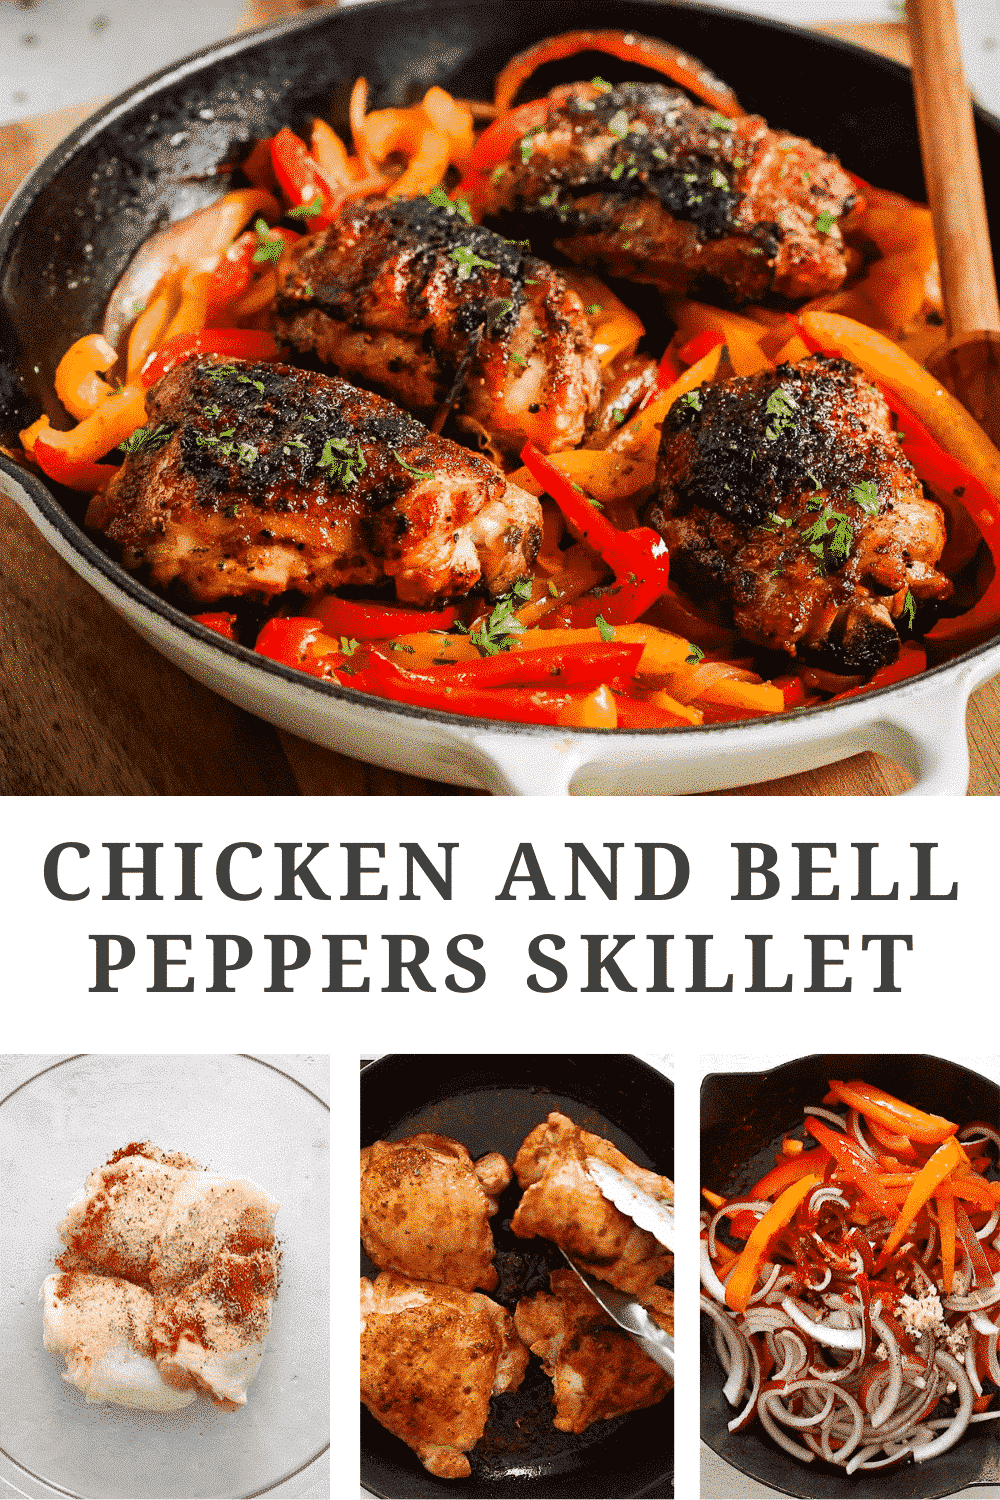 titled photo collage (and shown): Chicken and Belle Peppers Skillet